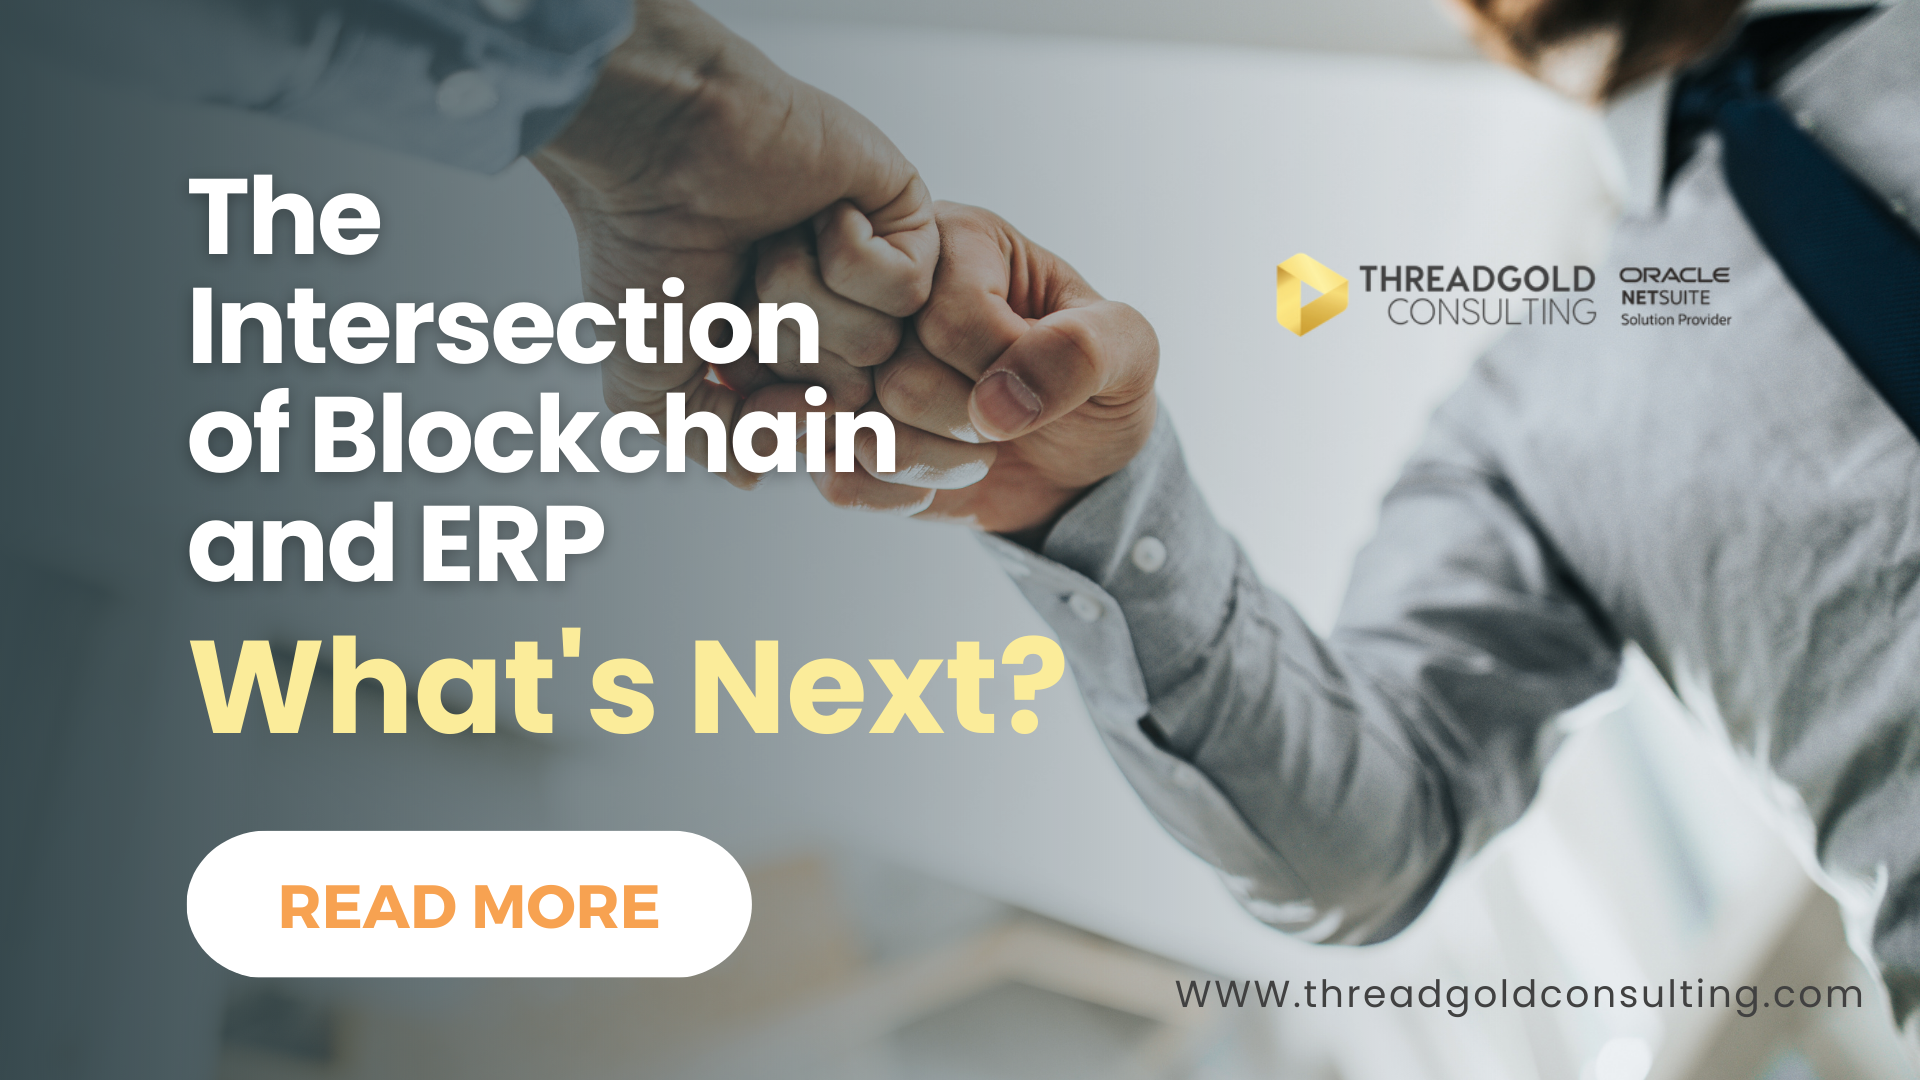 The Intersection of Blockchain and ERP: What's Next?